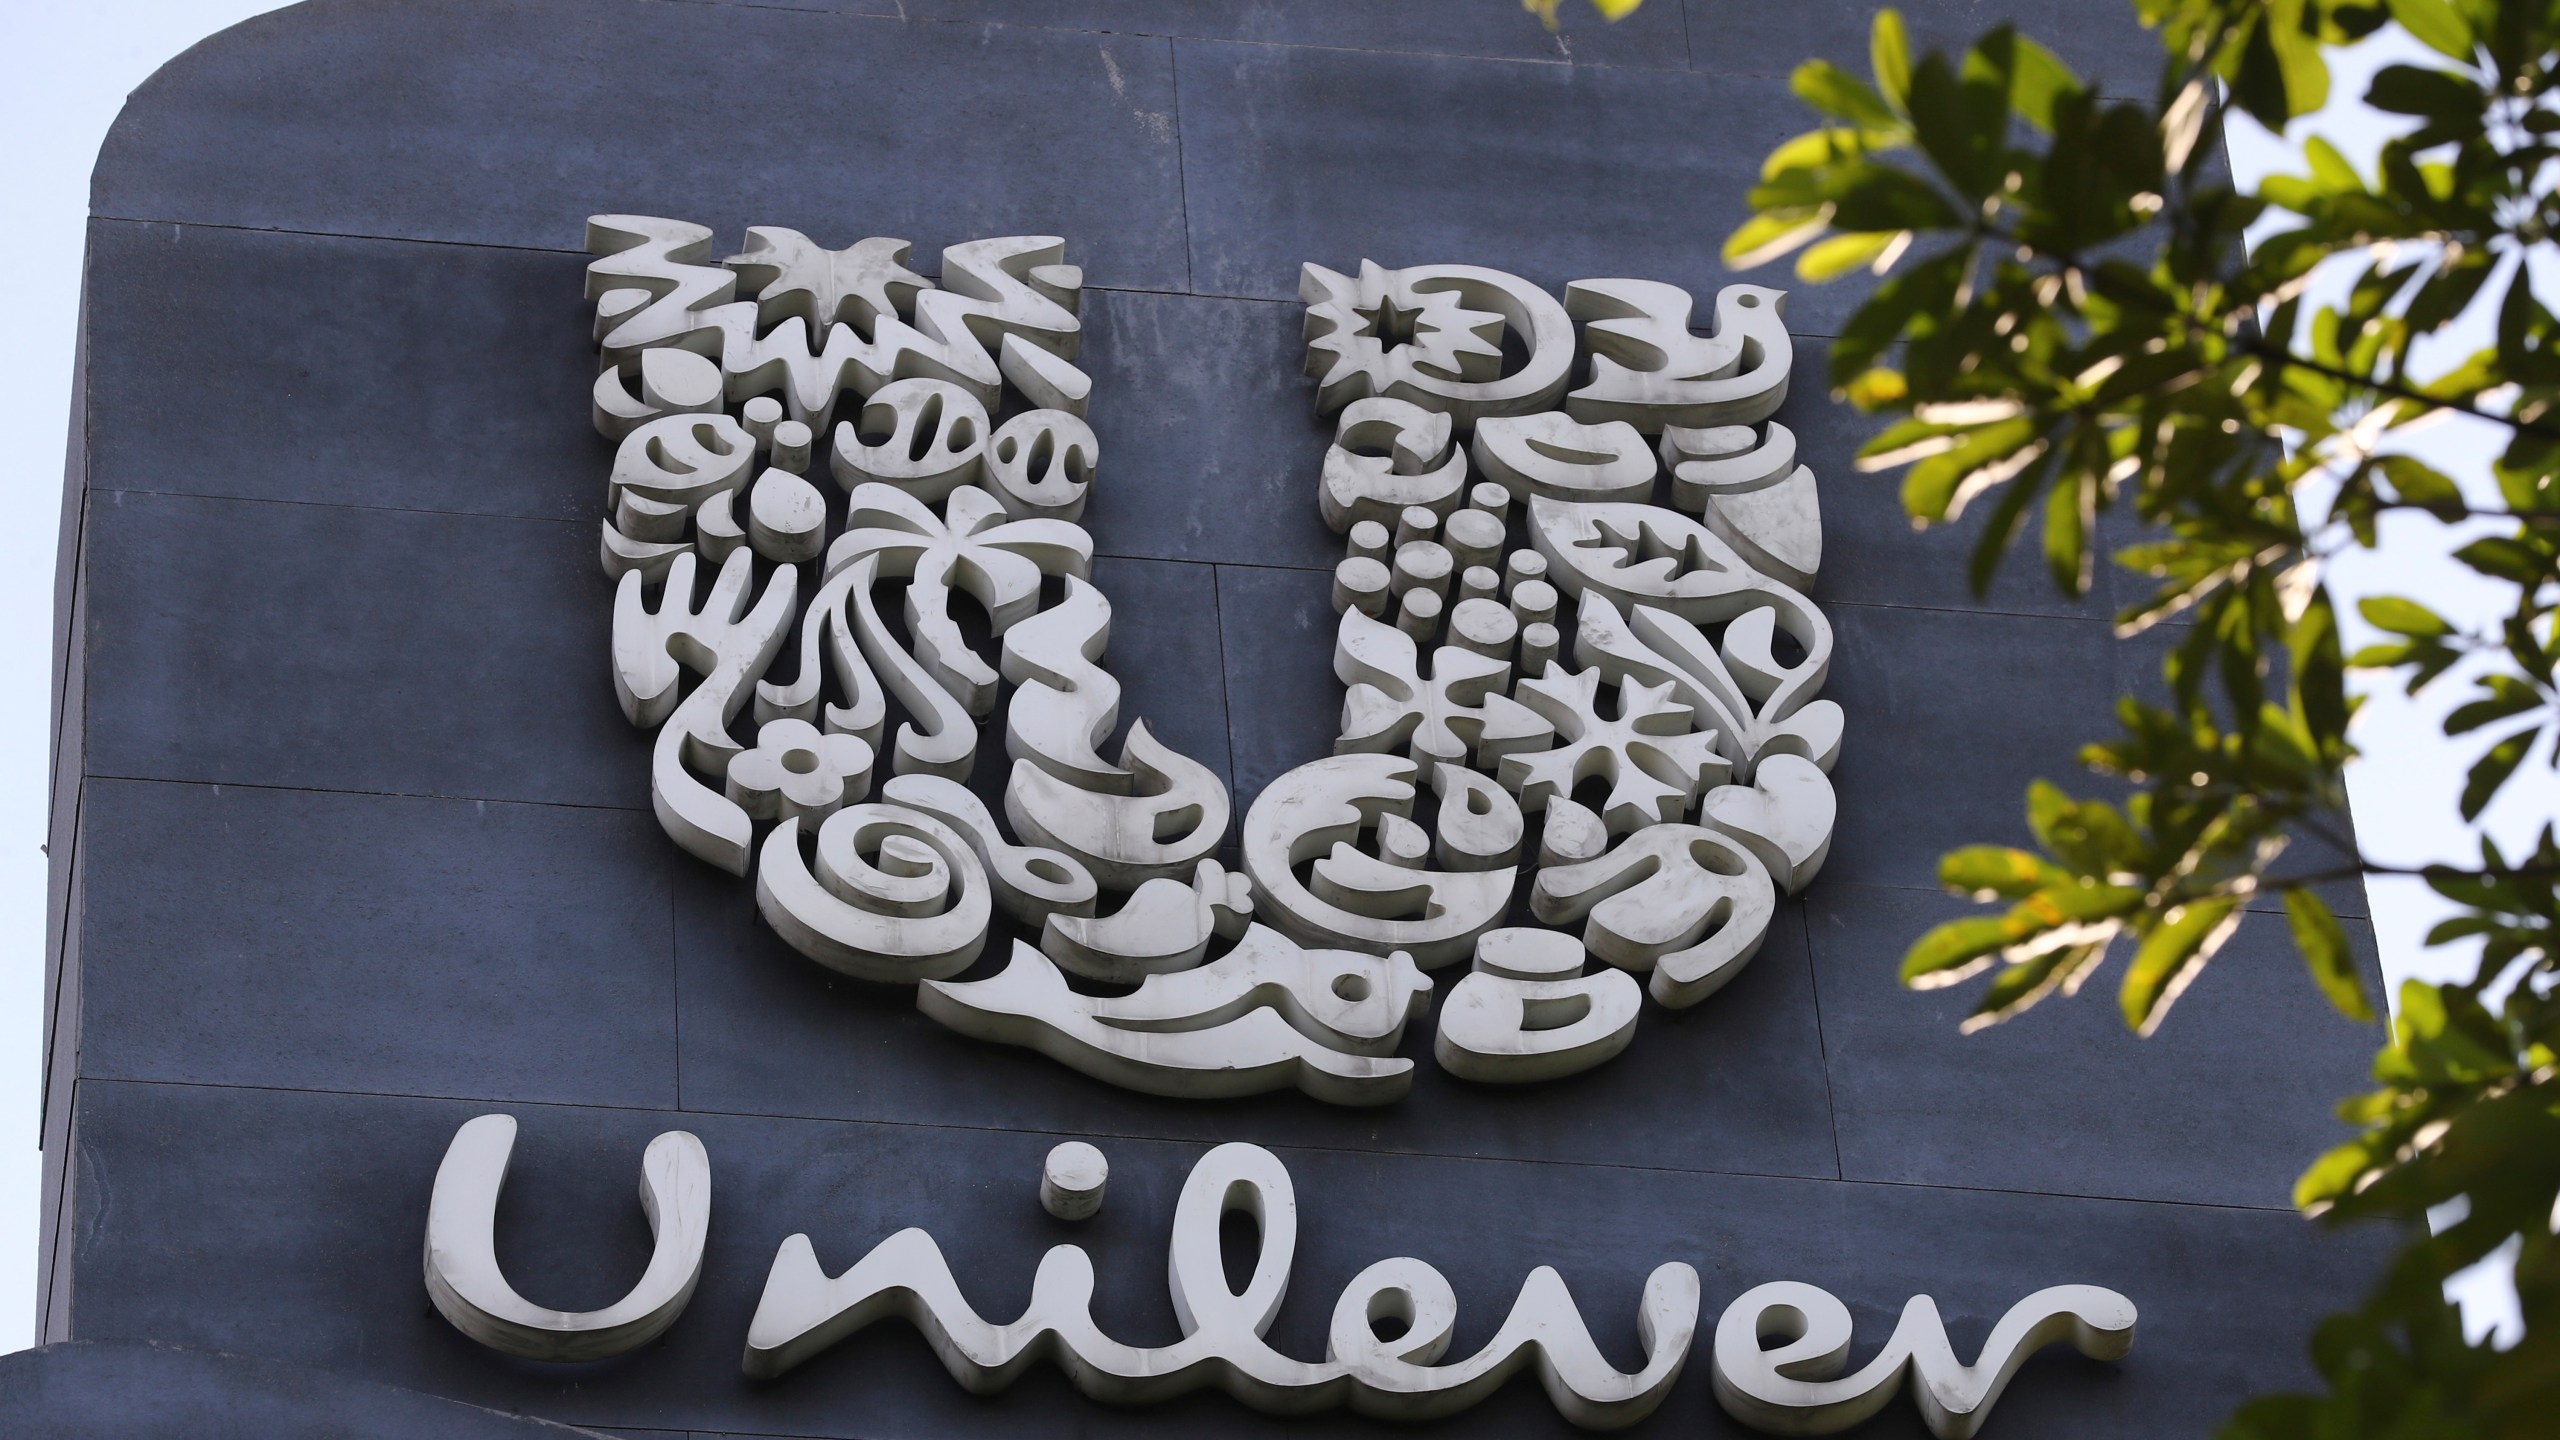 FILE - A Unilever logo is displayed outside the head office of PT Unilever Indonesia Tbk. in Tangerang, Indonesia, Tuesday, Nov. 16, 2021. Unilever, the company that makes Ben & Jerry’s ice cream, Dove soaps and Vaseline, says it's cutting 7,500 jobs and spinning off its ice cream business to reduce costs and boost profits. (AP Photo/Tatan Syuflana, File)